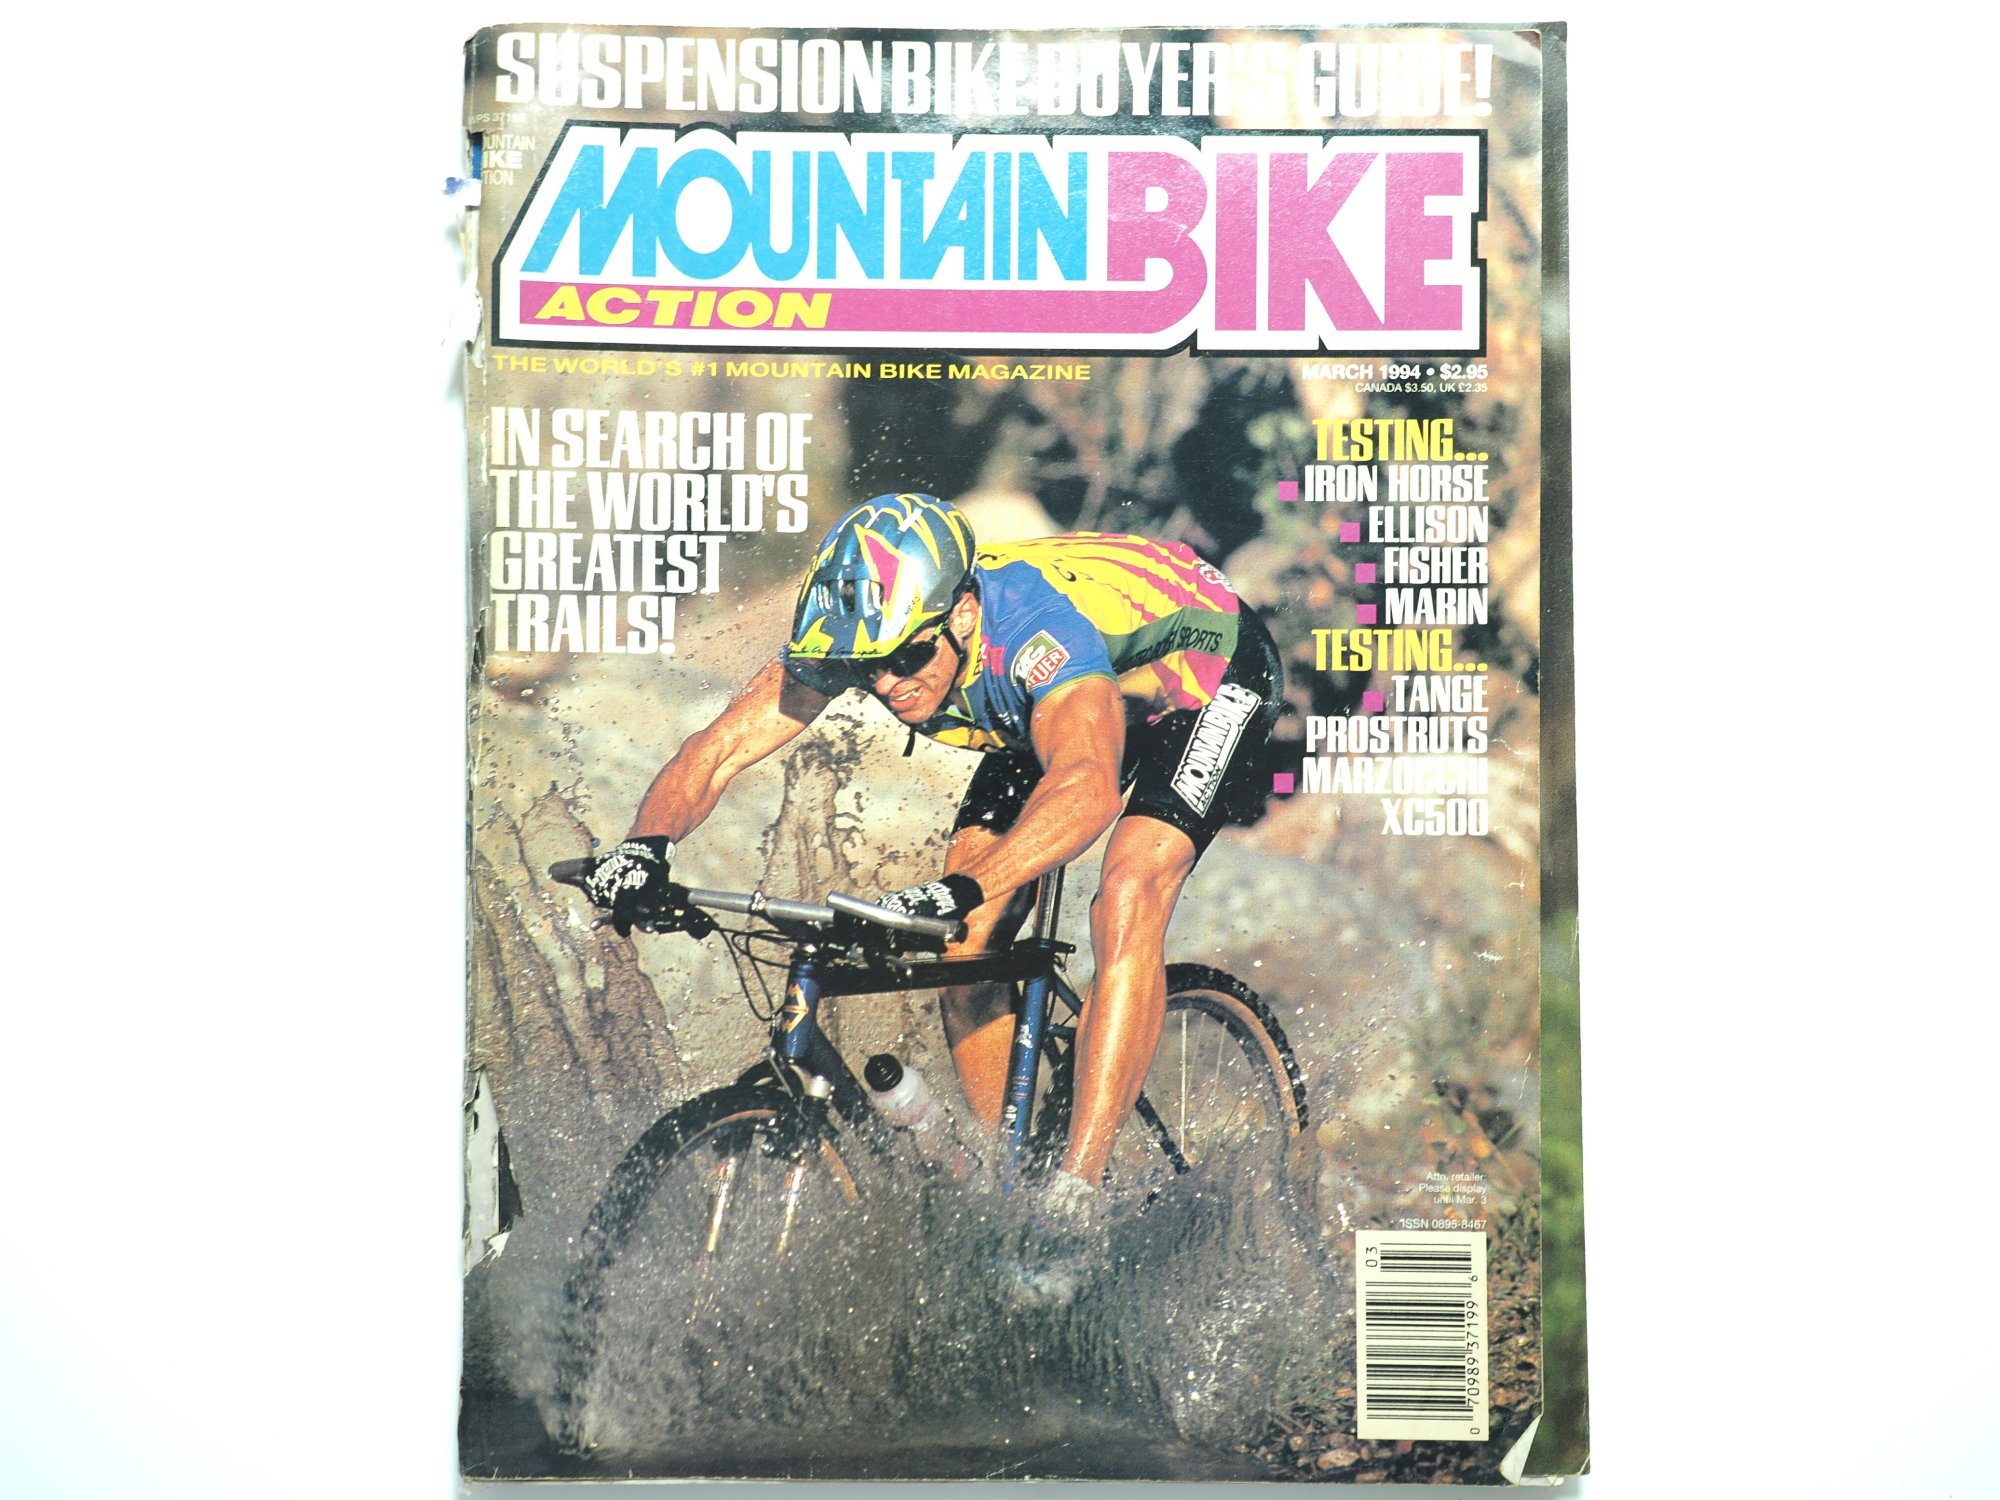 MOUNTAIN BIKE ACTION
1994(MARCH)